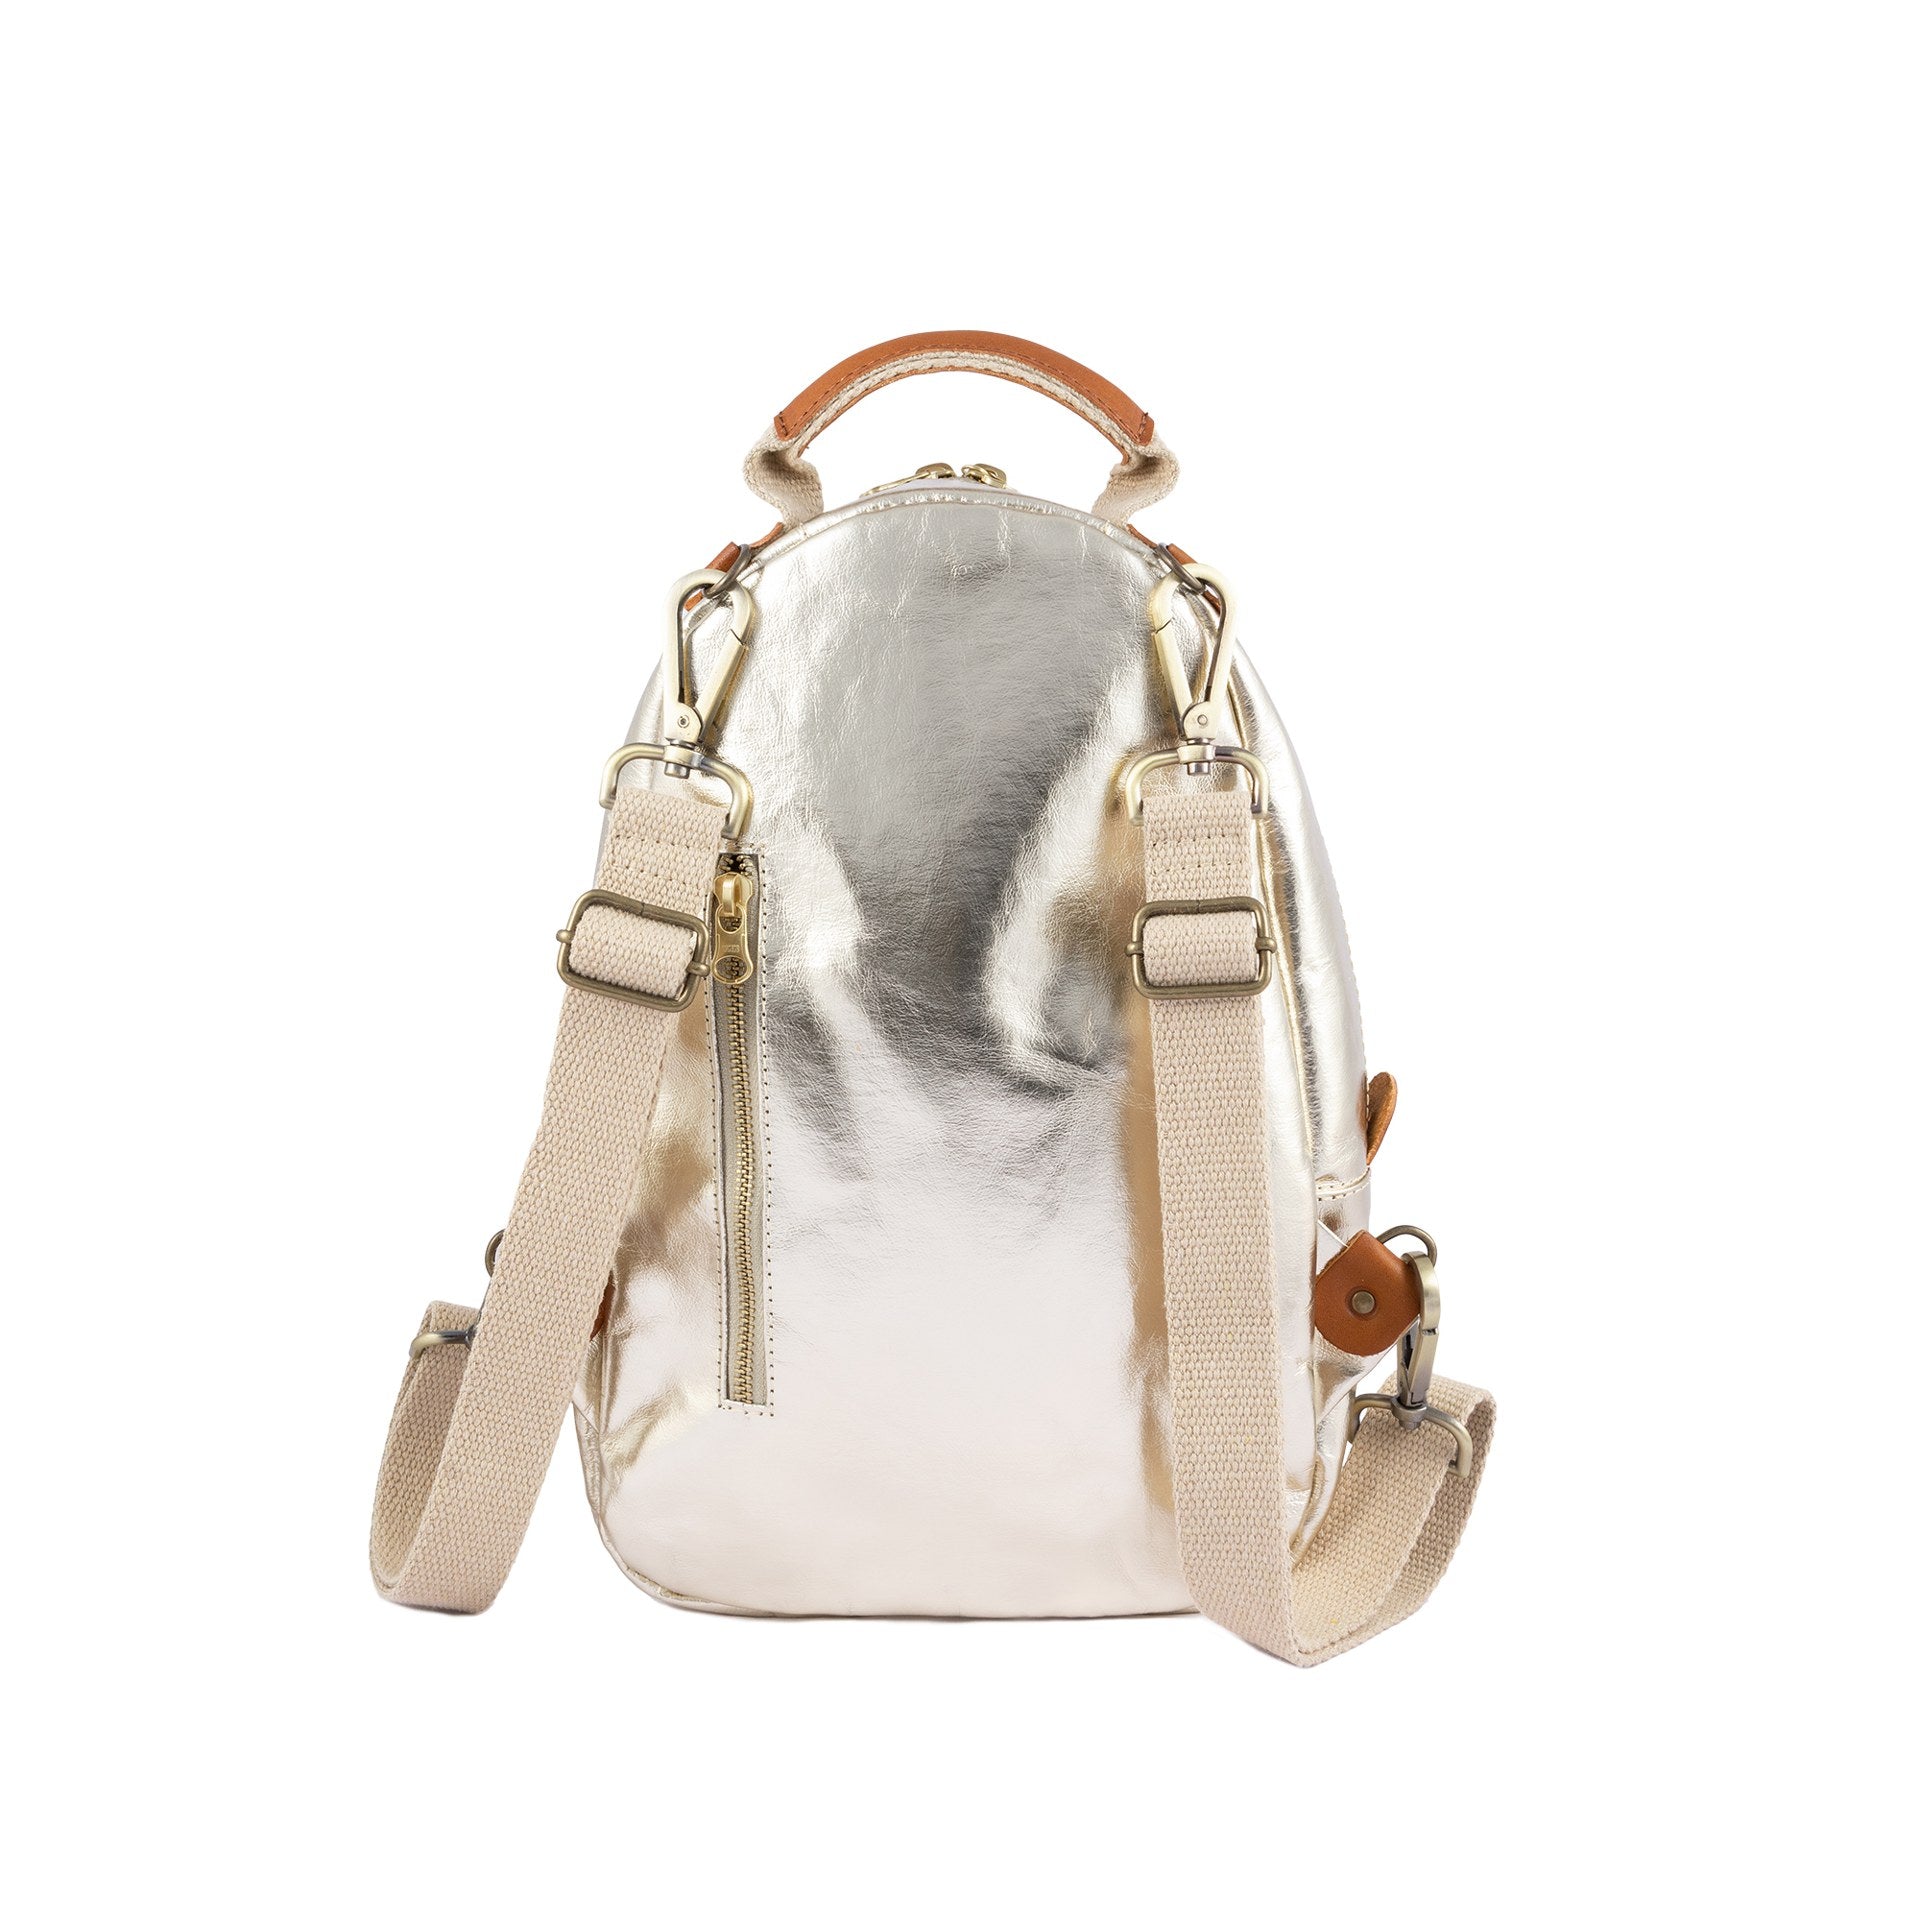 A gold metallic washable paper backpack is shown from a back angle. It features two adjustable cream canvas shoulder straps and a gold zip pocket in the rear.